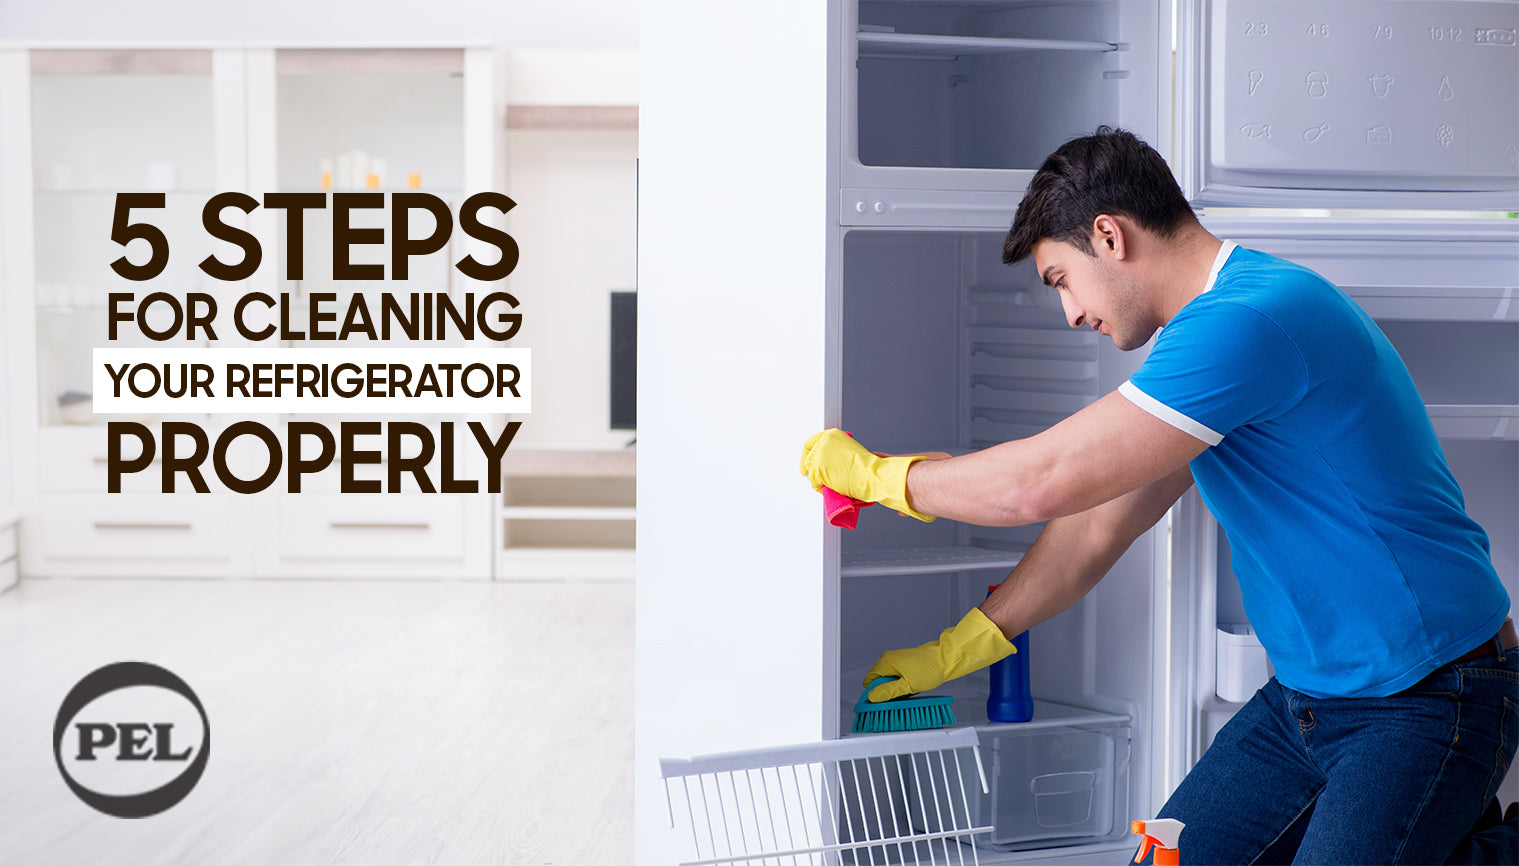 5 Tips for Cleaning Your Refrigerator Properly